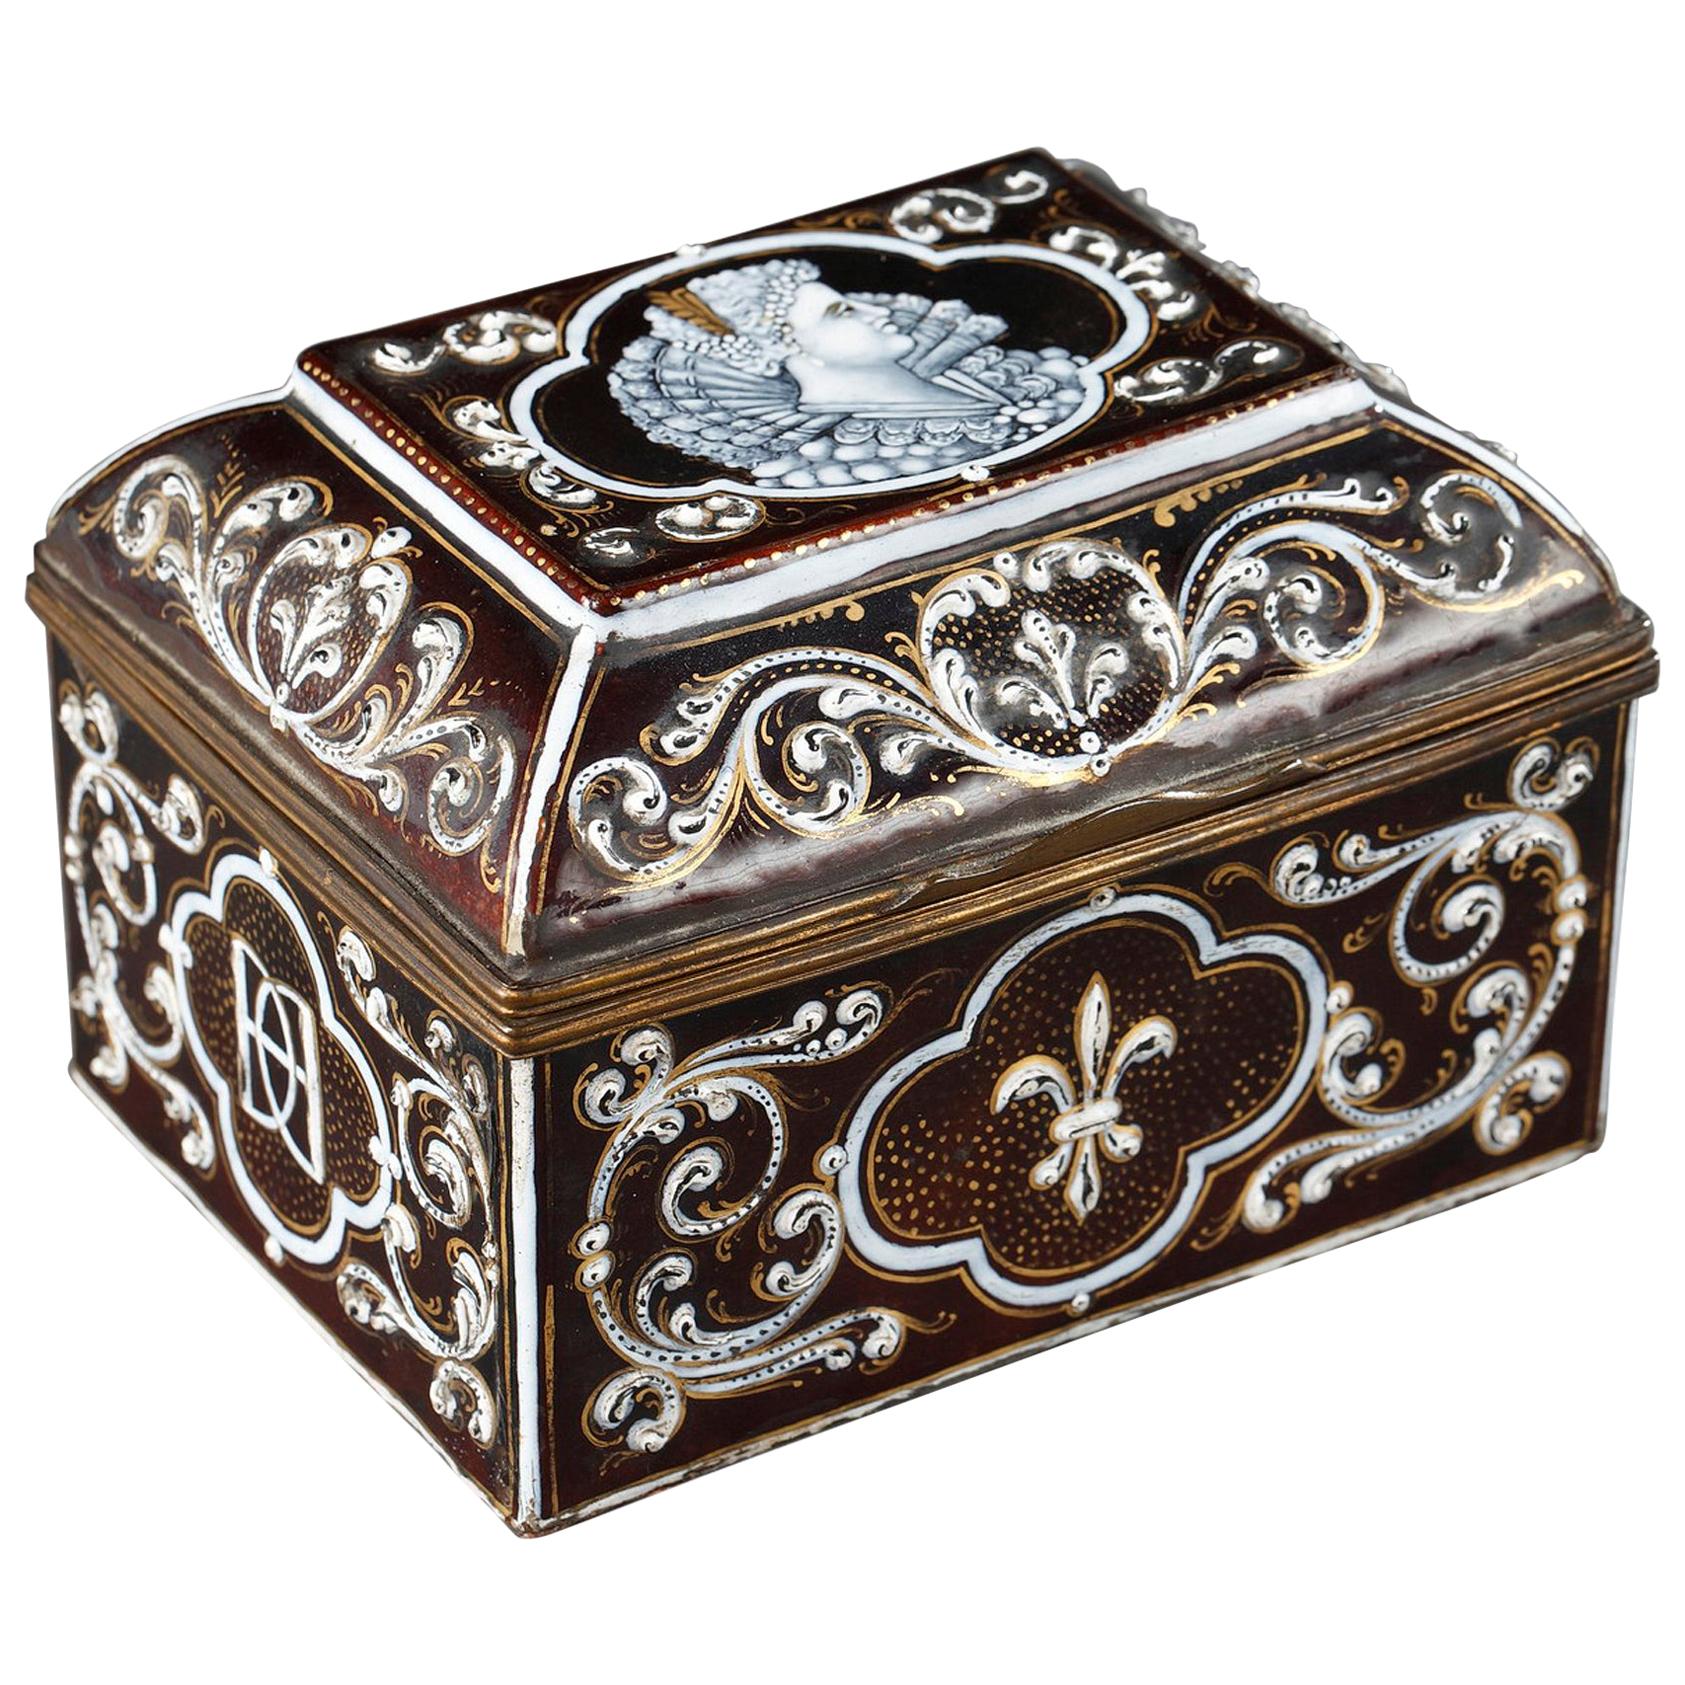 What is a keepsake box called?